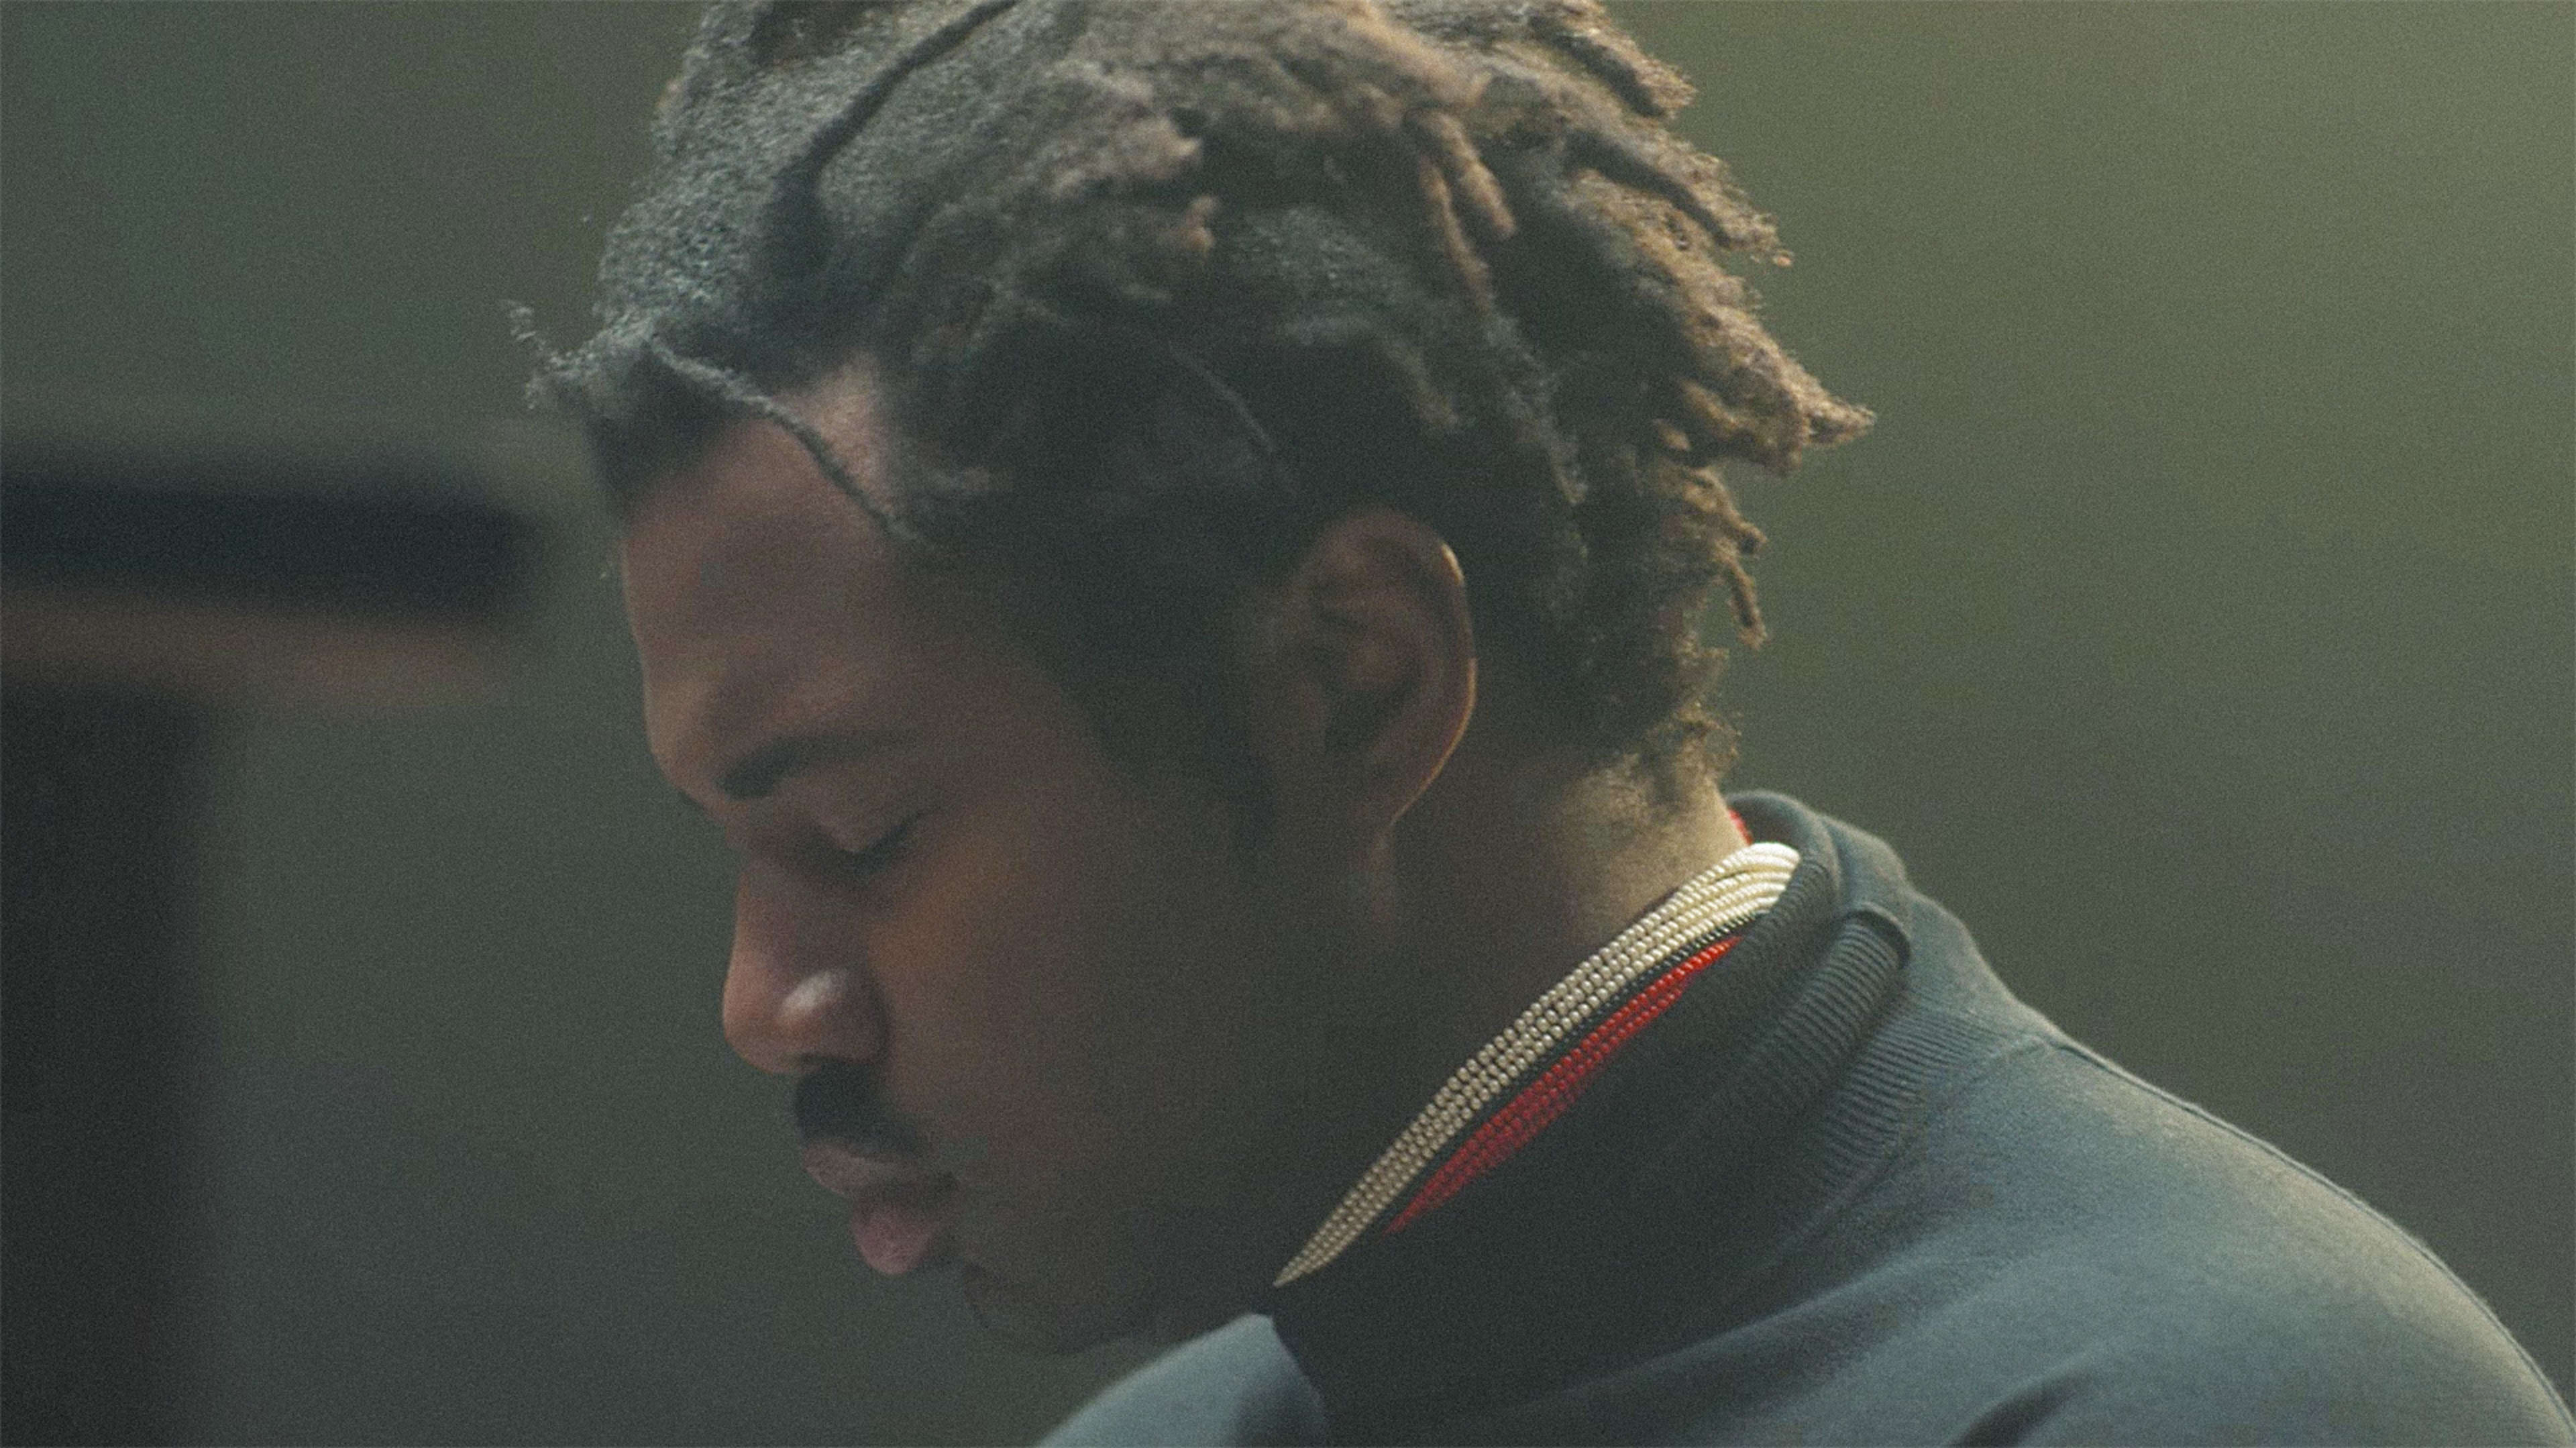 The Music Industry’s Go-To Collaborator Sampha Just Wants To Understand Himself Better